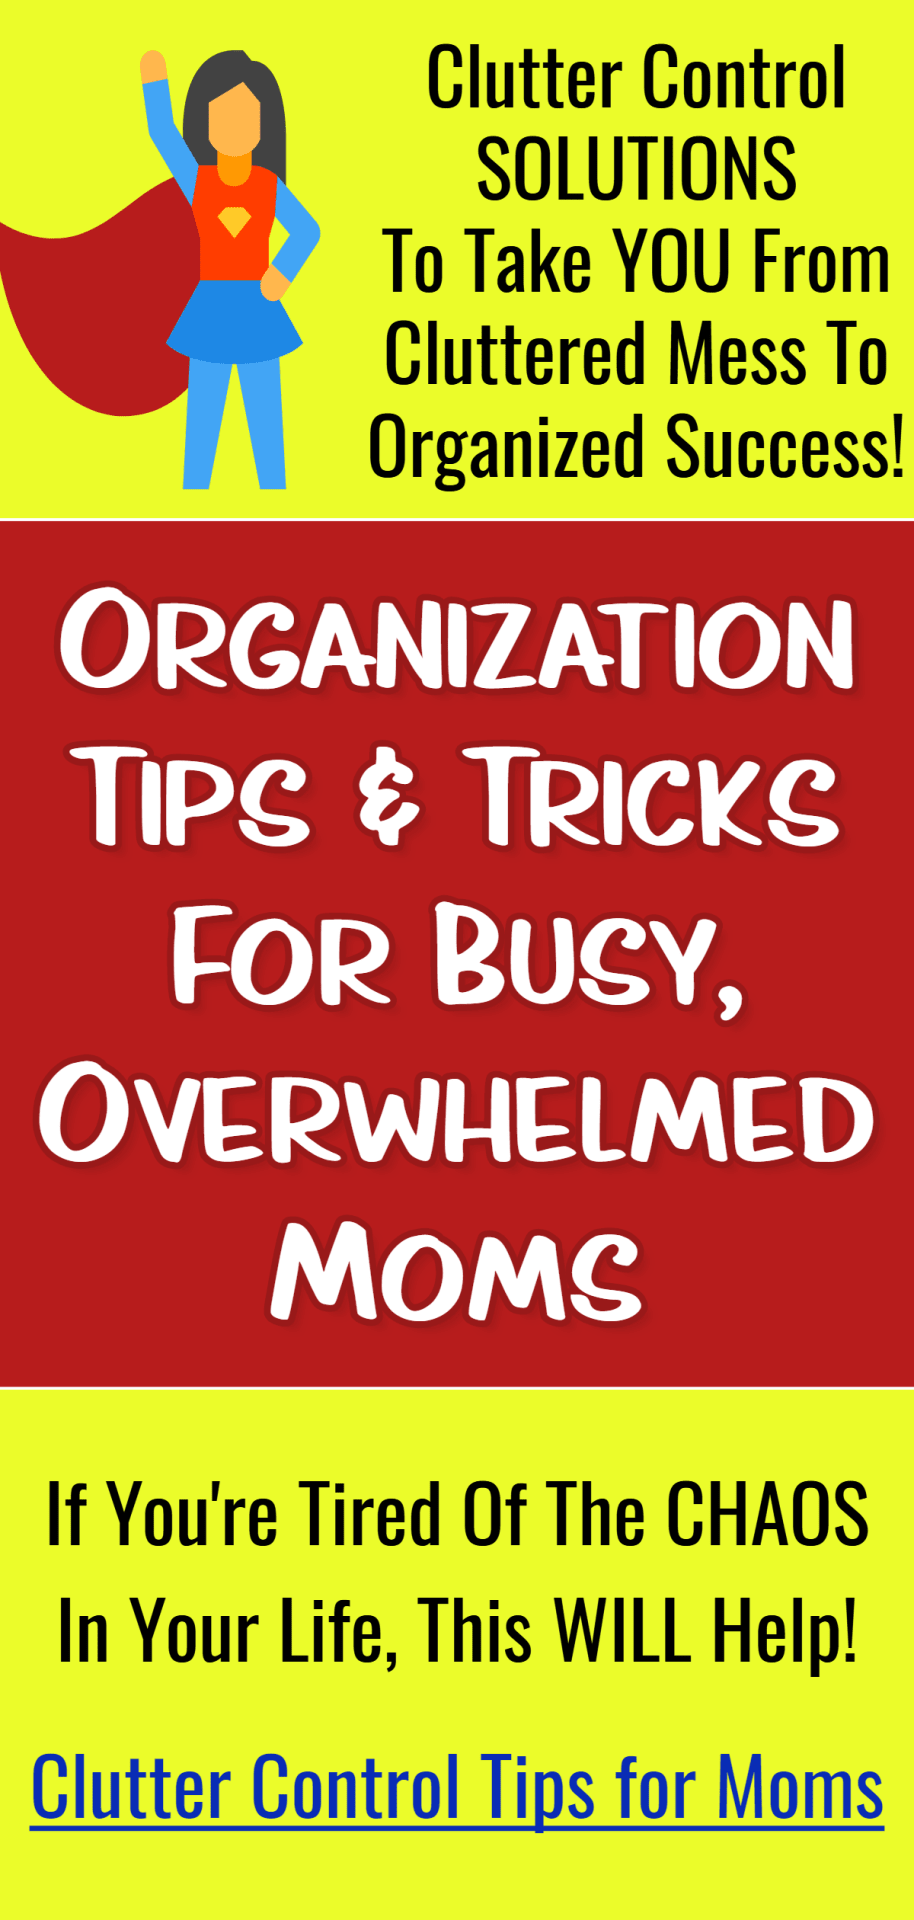 Decluttering YOUR Life!  Clutter control SOLUTIONS for busy OVERWHELMED moms to go from cluttered mess to organized success - these organization tips and organization ideas for the home WILL help you unclutter & declutter your home, your mind AND declutter your life even if on a budget or a lazy girl!  Free organization printables, decluttering ideas, organization hacks, worksheets, cheatsheets, free ebooks, articles and more!